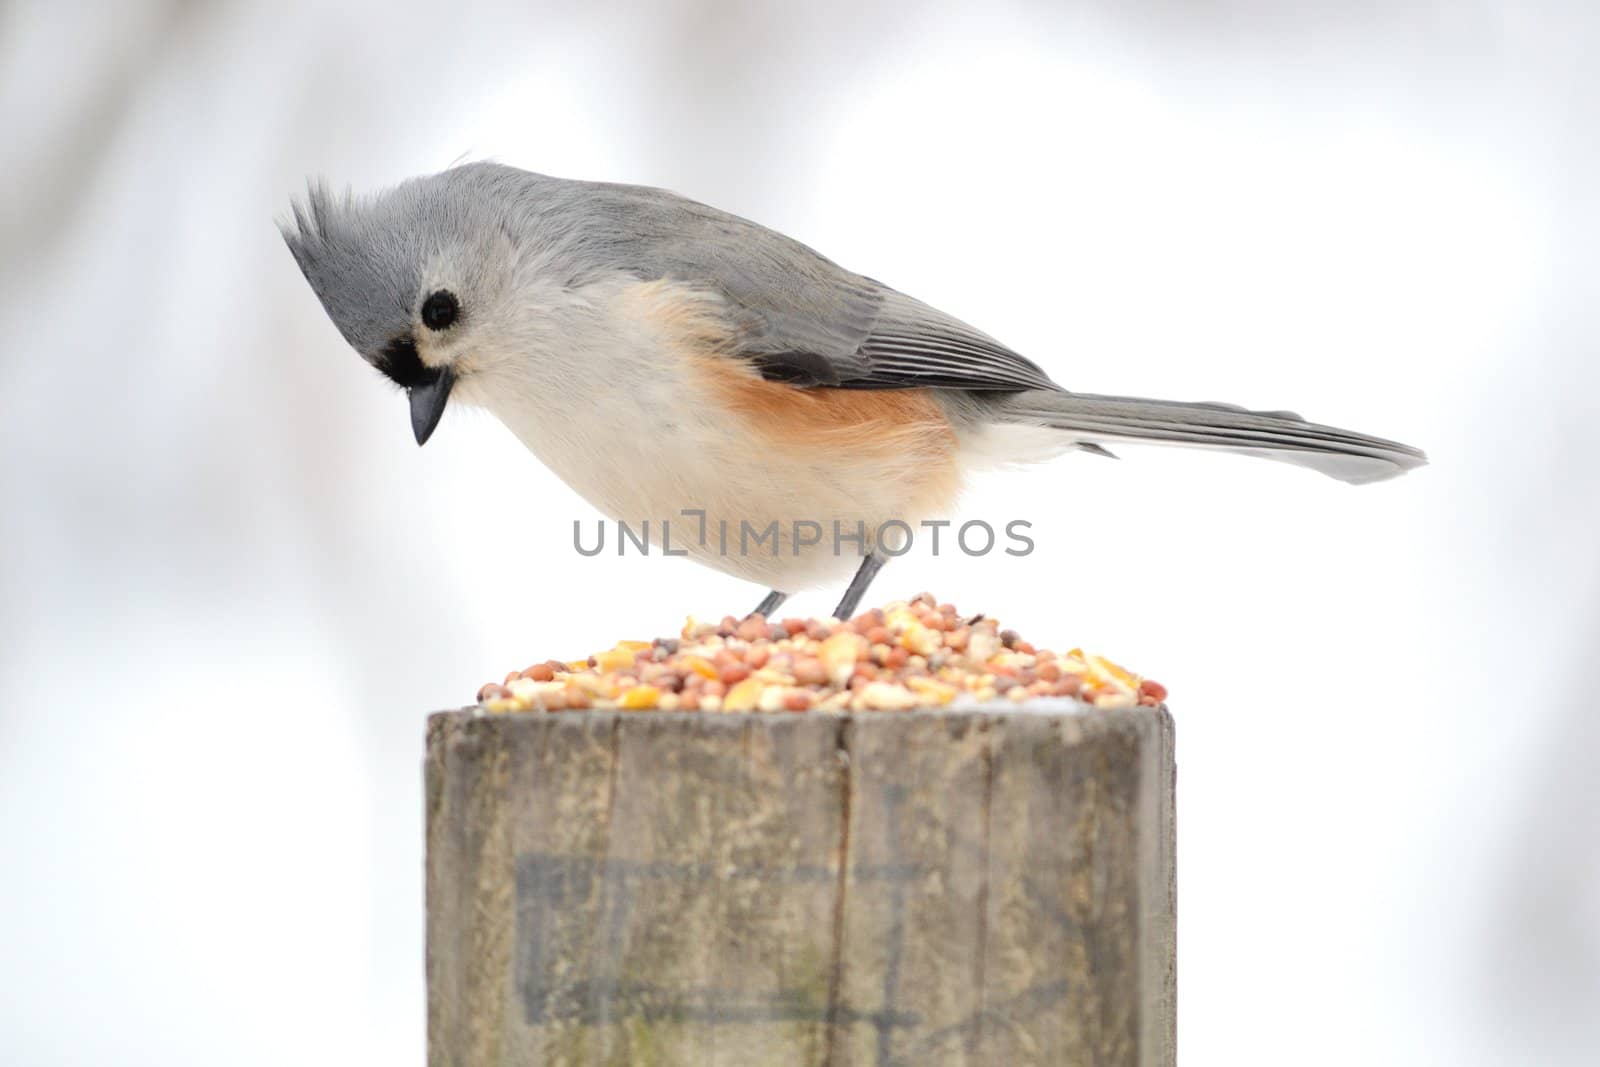 A tufted titmouse perched on a post with bird seed.